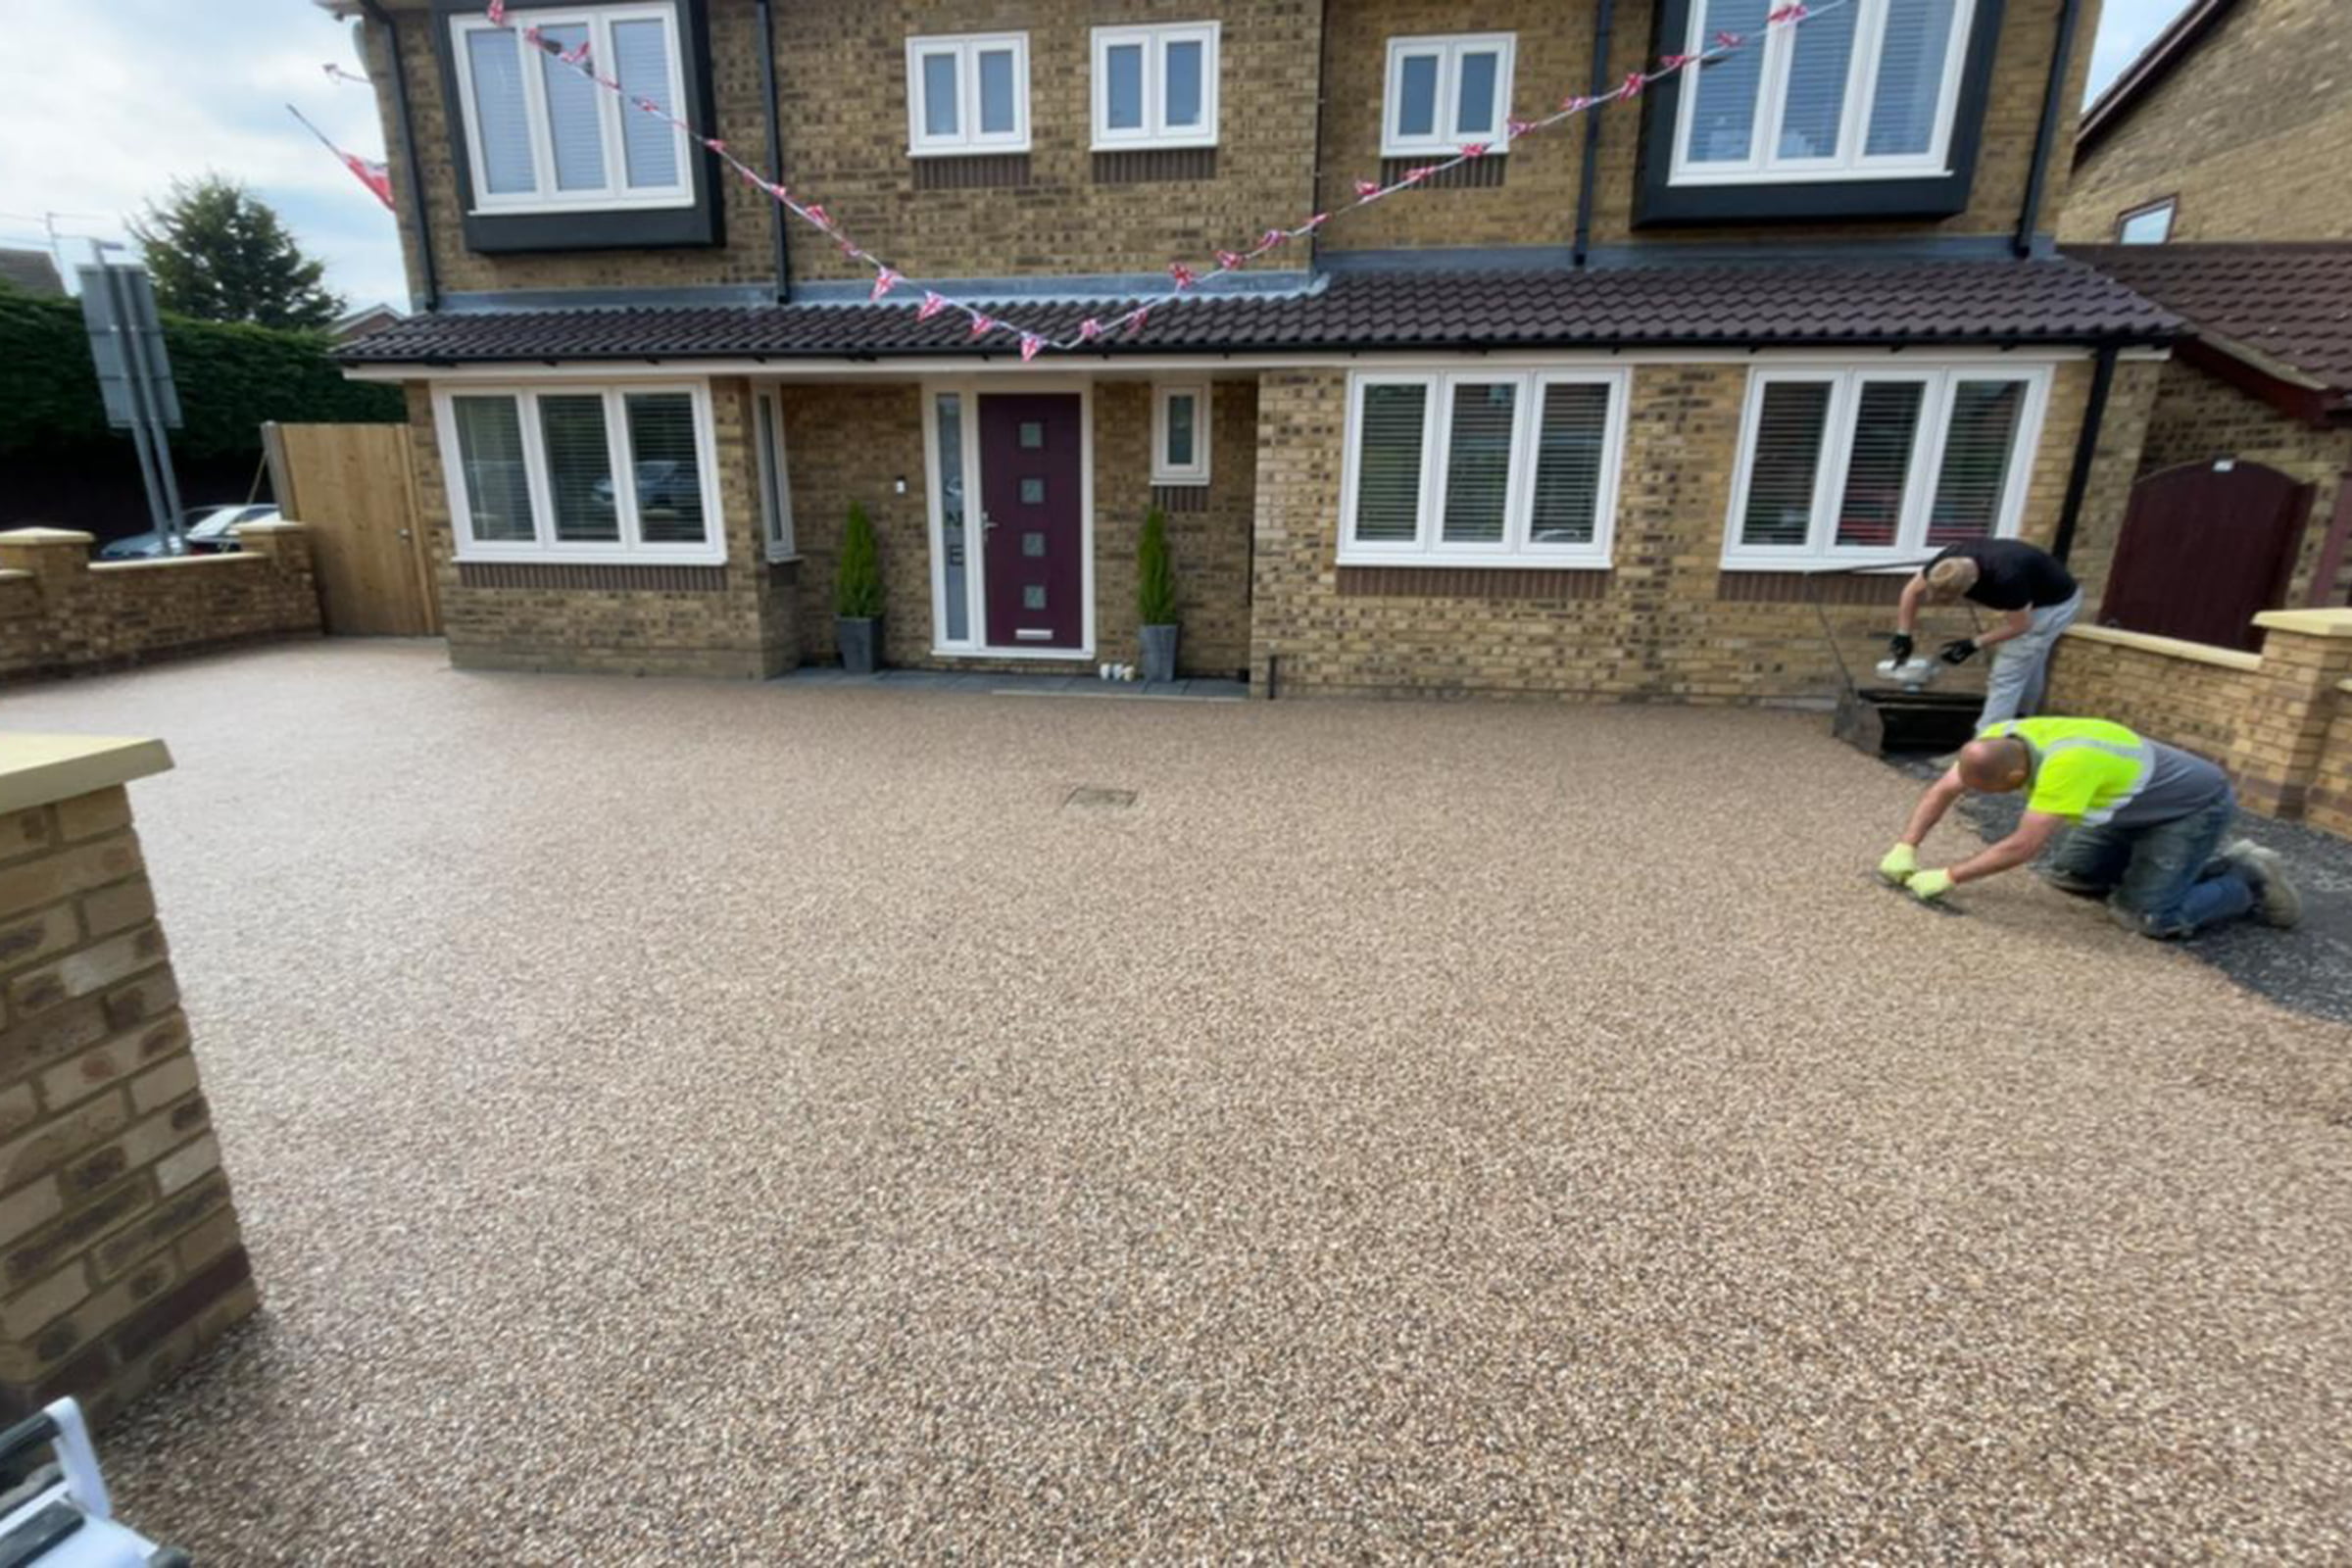 Flooring contractors working on a resin bound driveway in Wellingborough